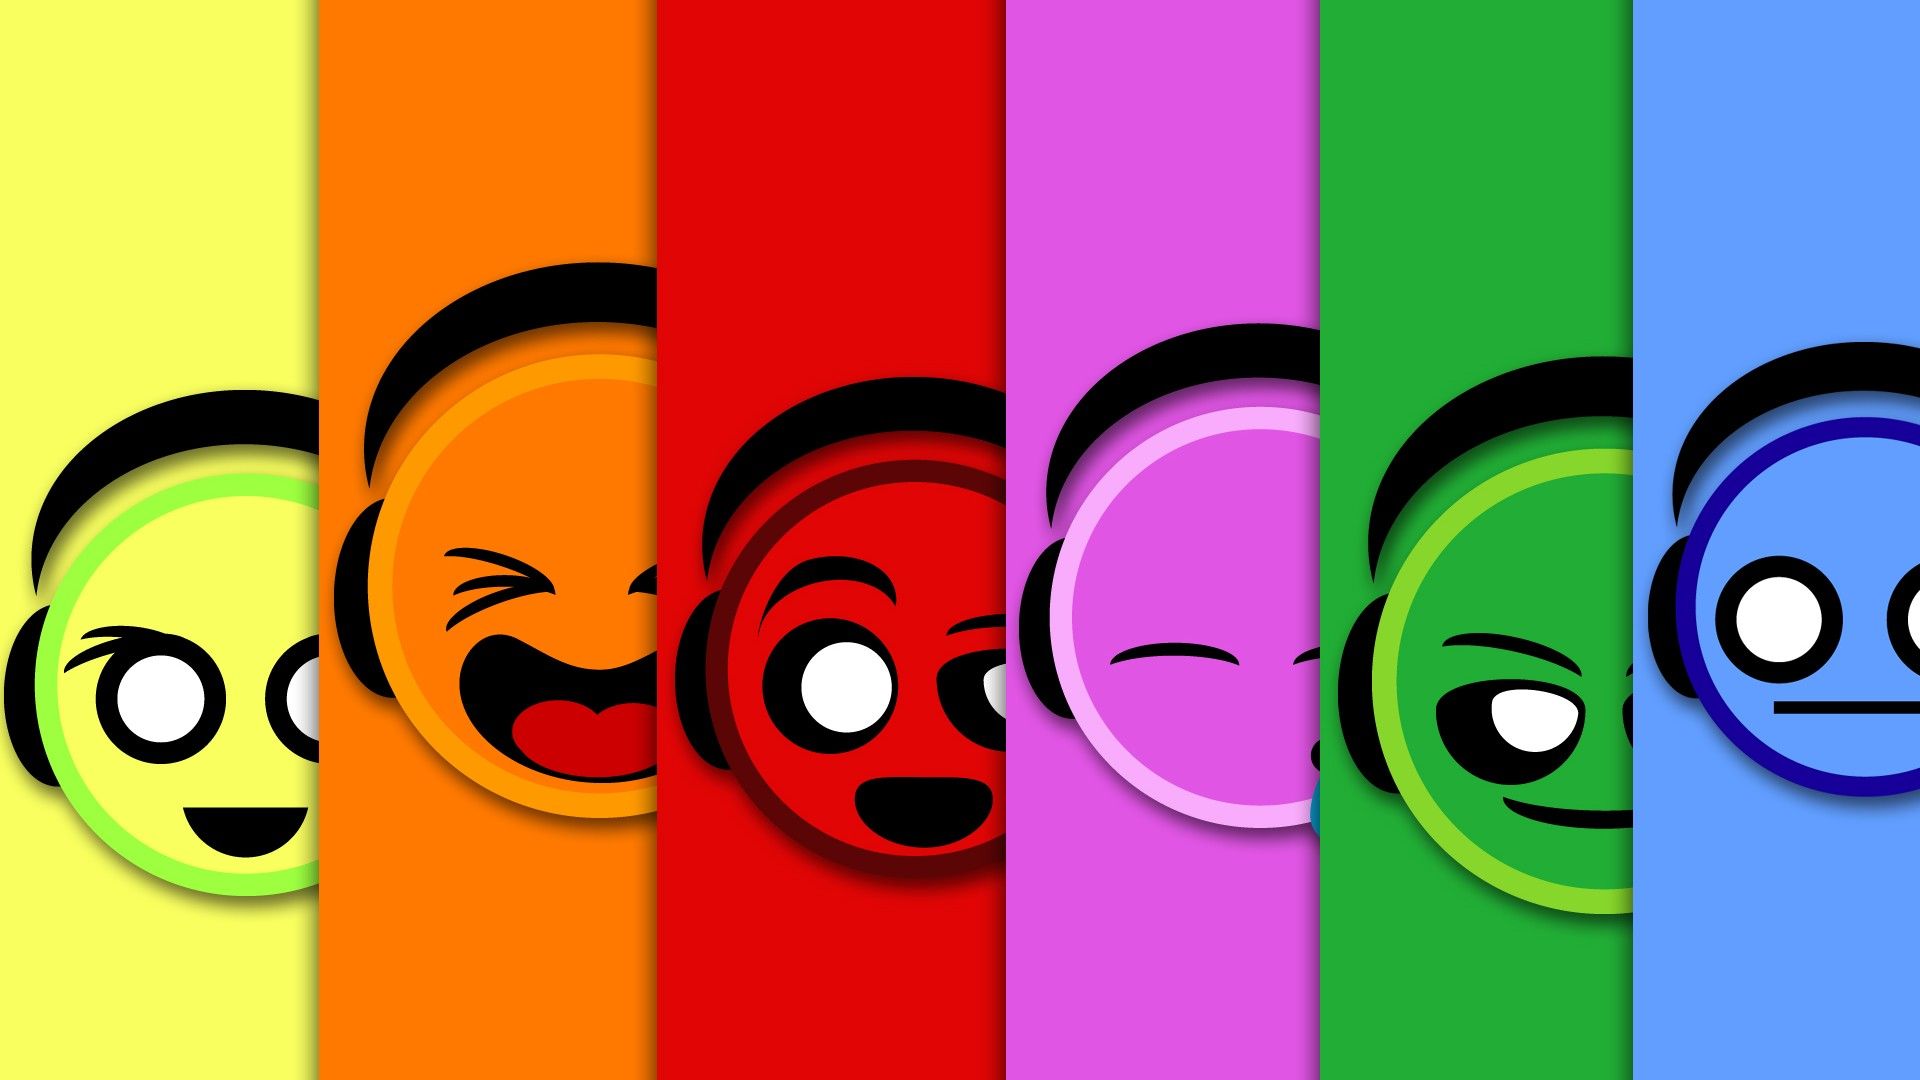 HD wallpaper, Colorful, Faces, Smiley